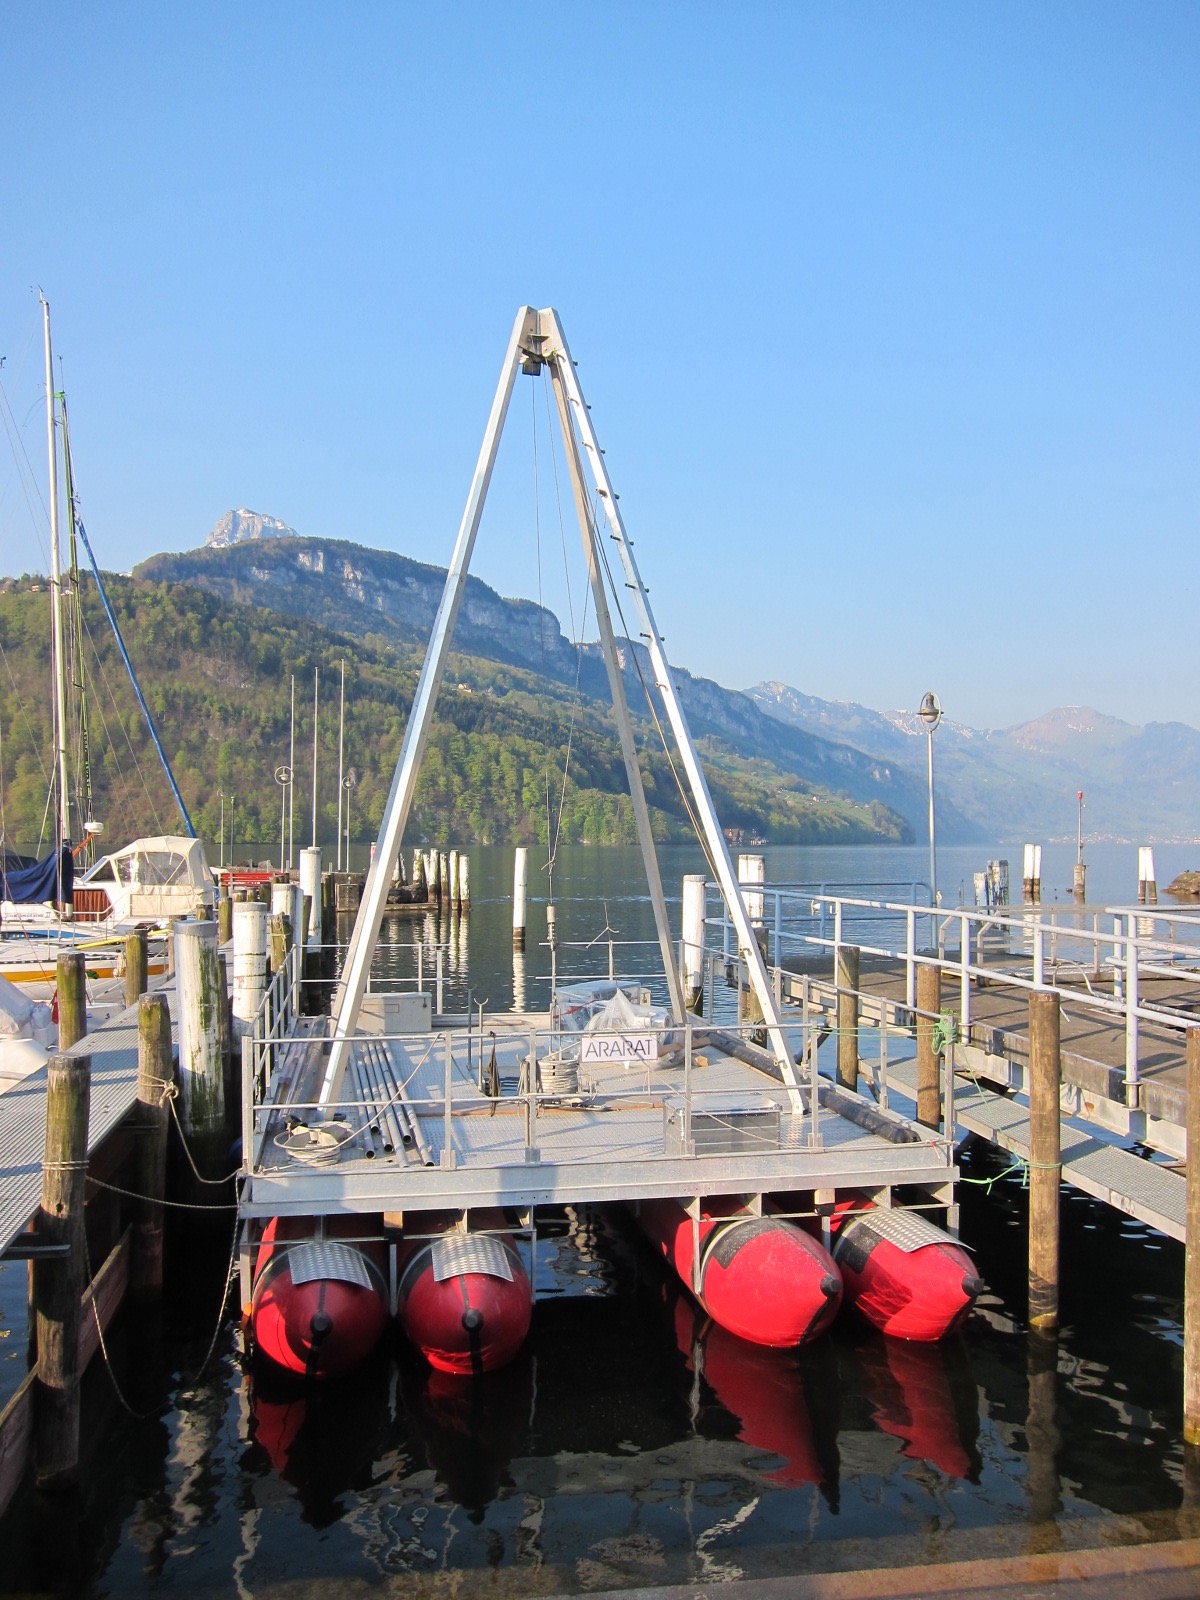 Enlarged view: Kullenberg platform for recovering up to 12m-long sediment cores